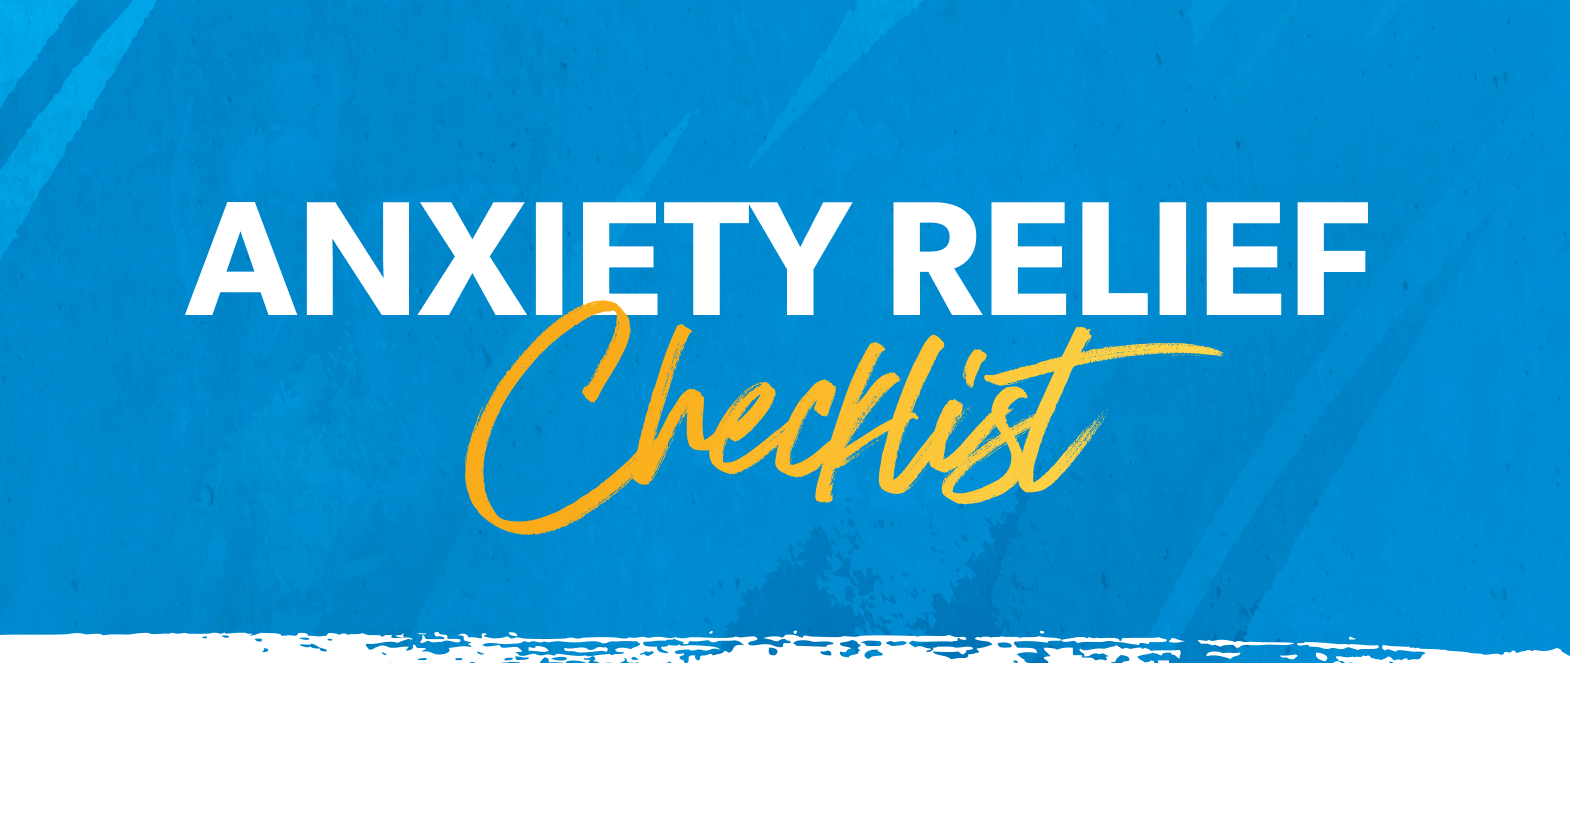 Anxiety Relief Checklist - Ramsey